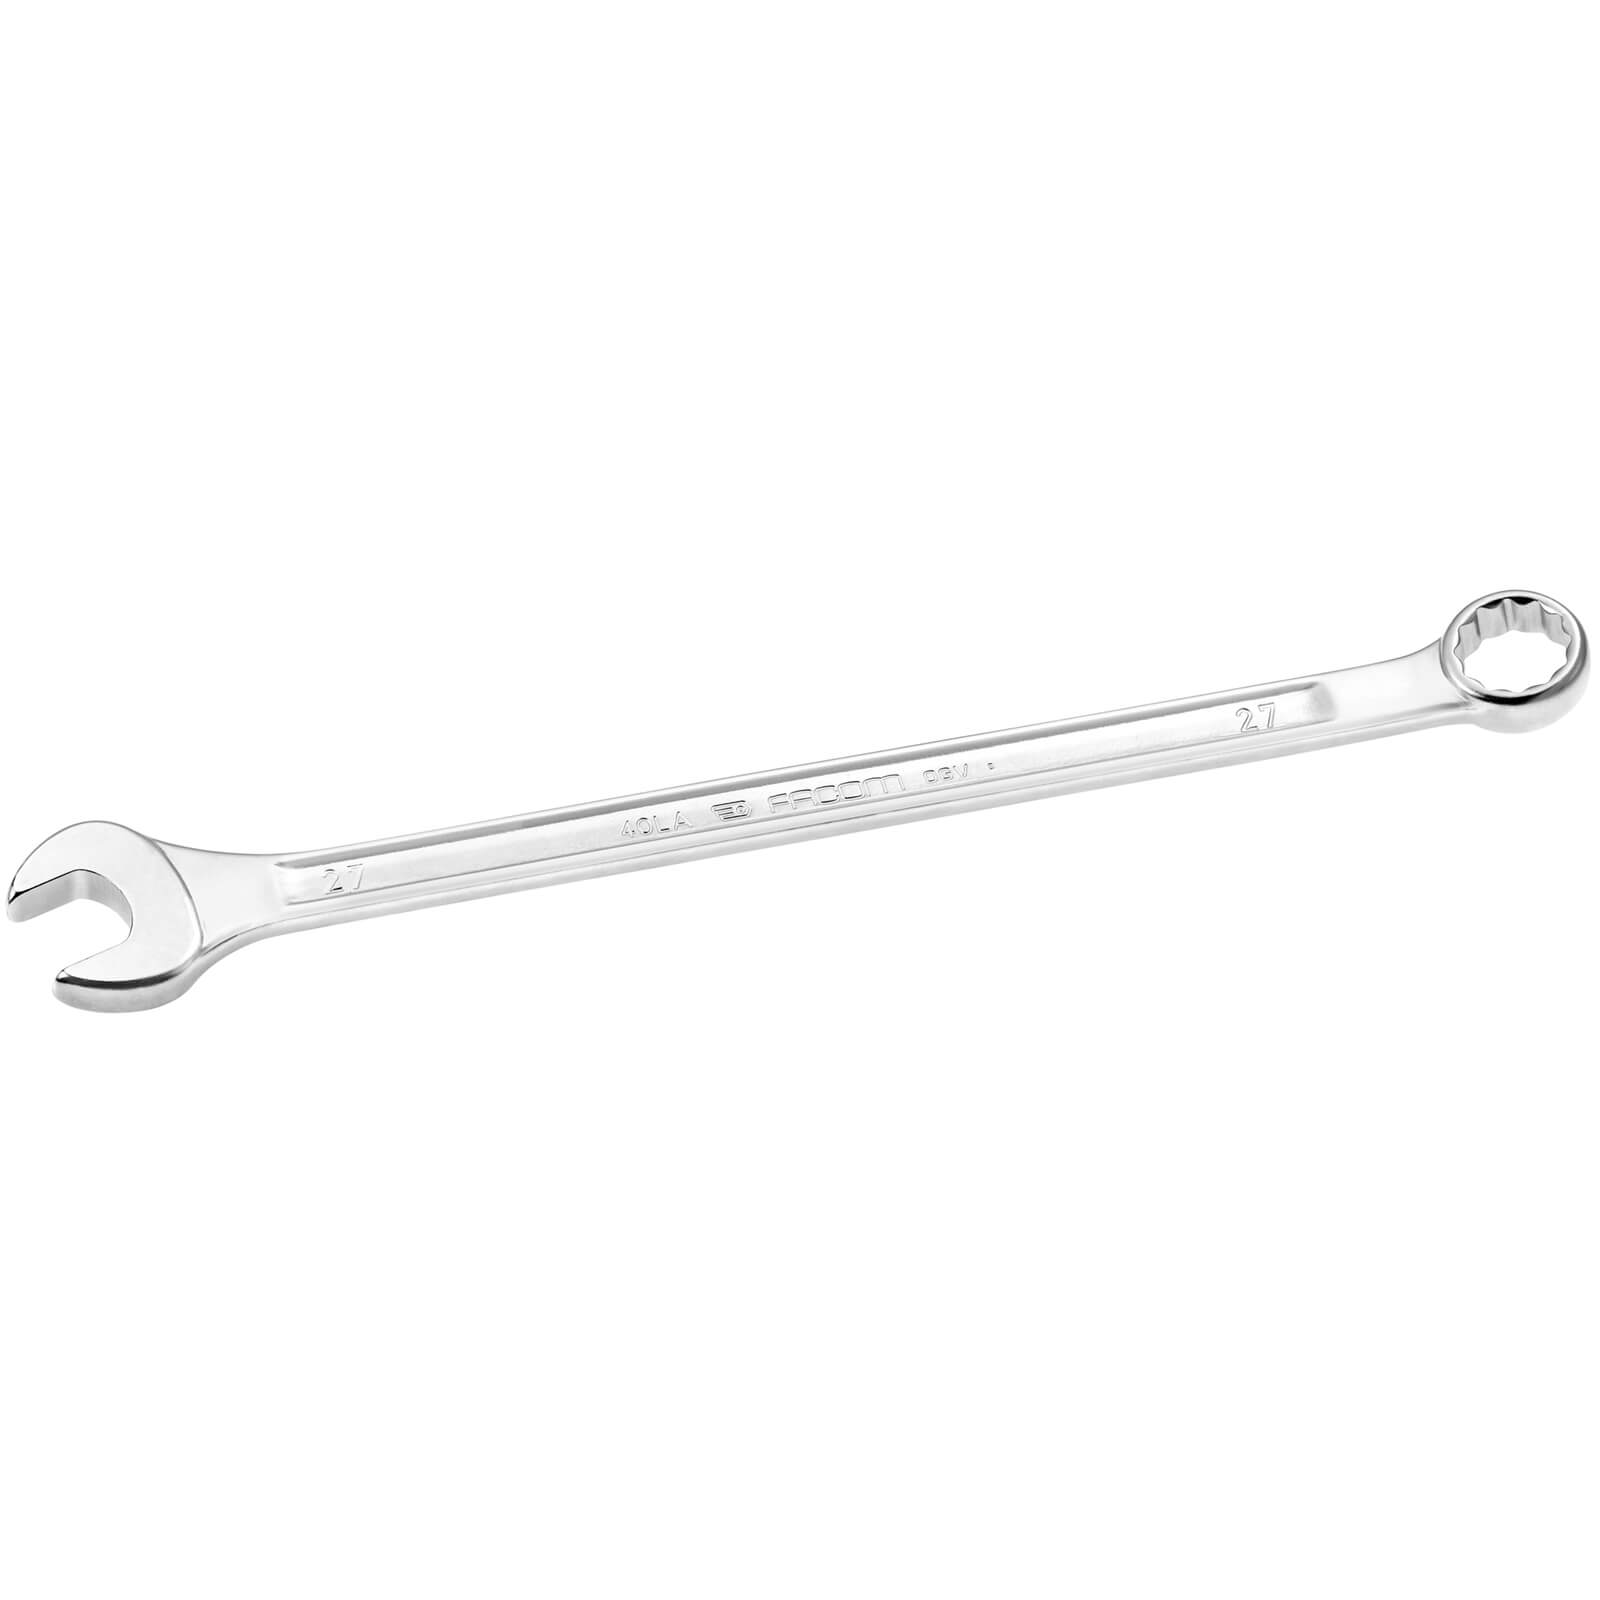 Image of Facom Long Reach Combination Spanner Metric 19mm